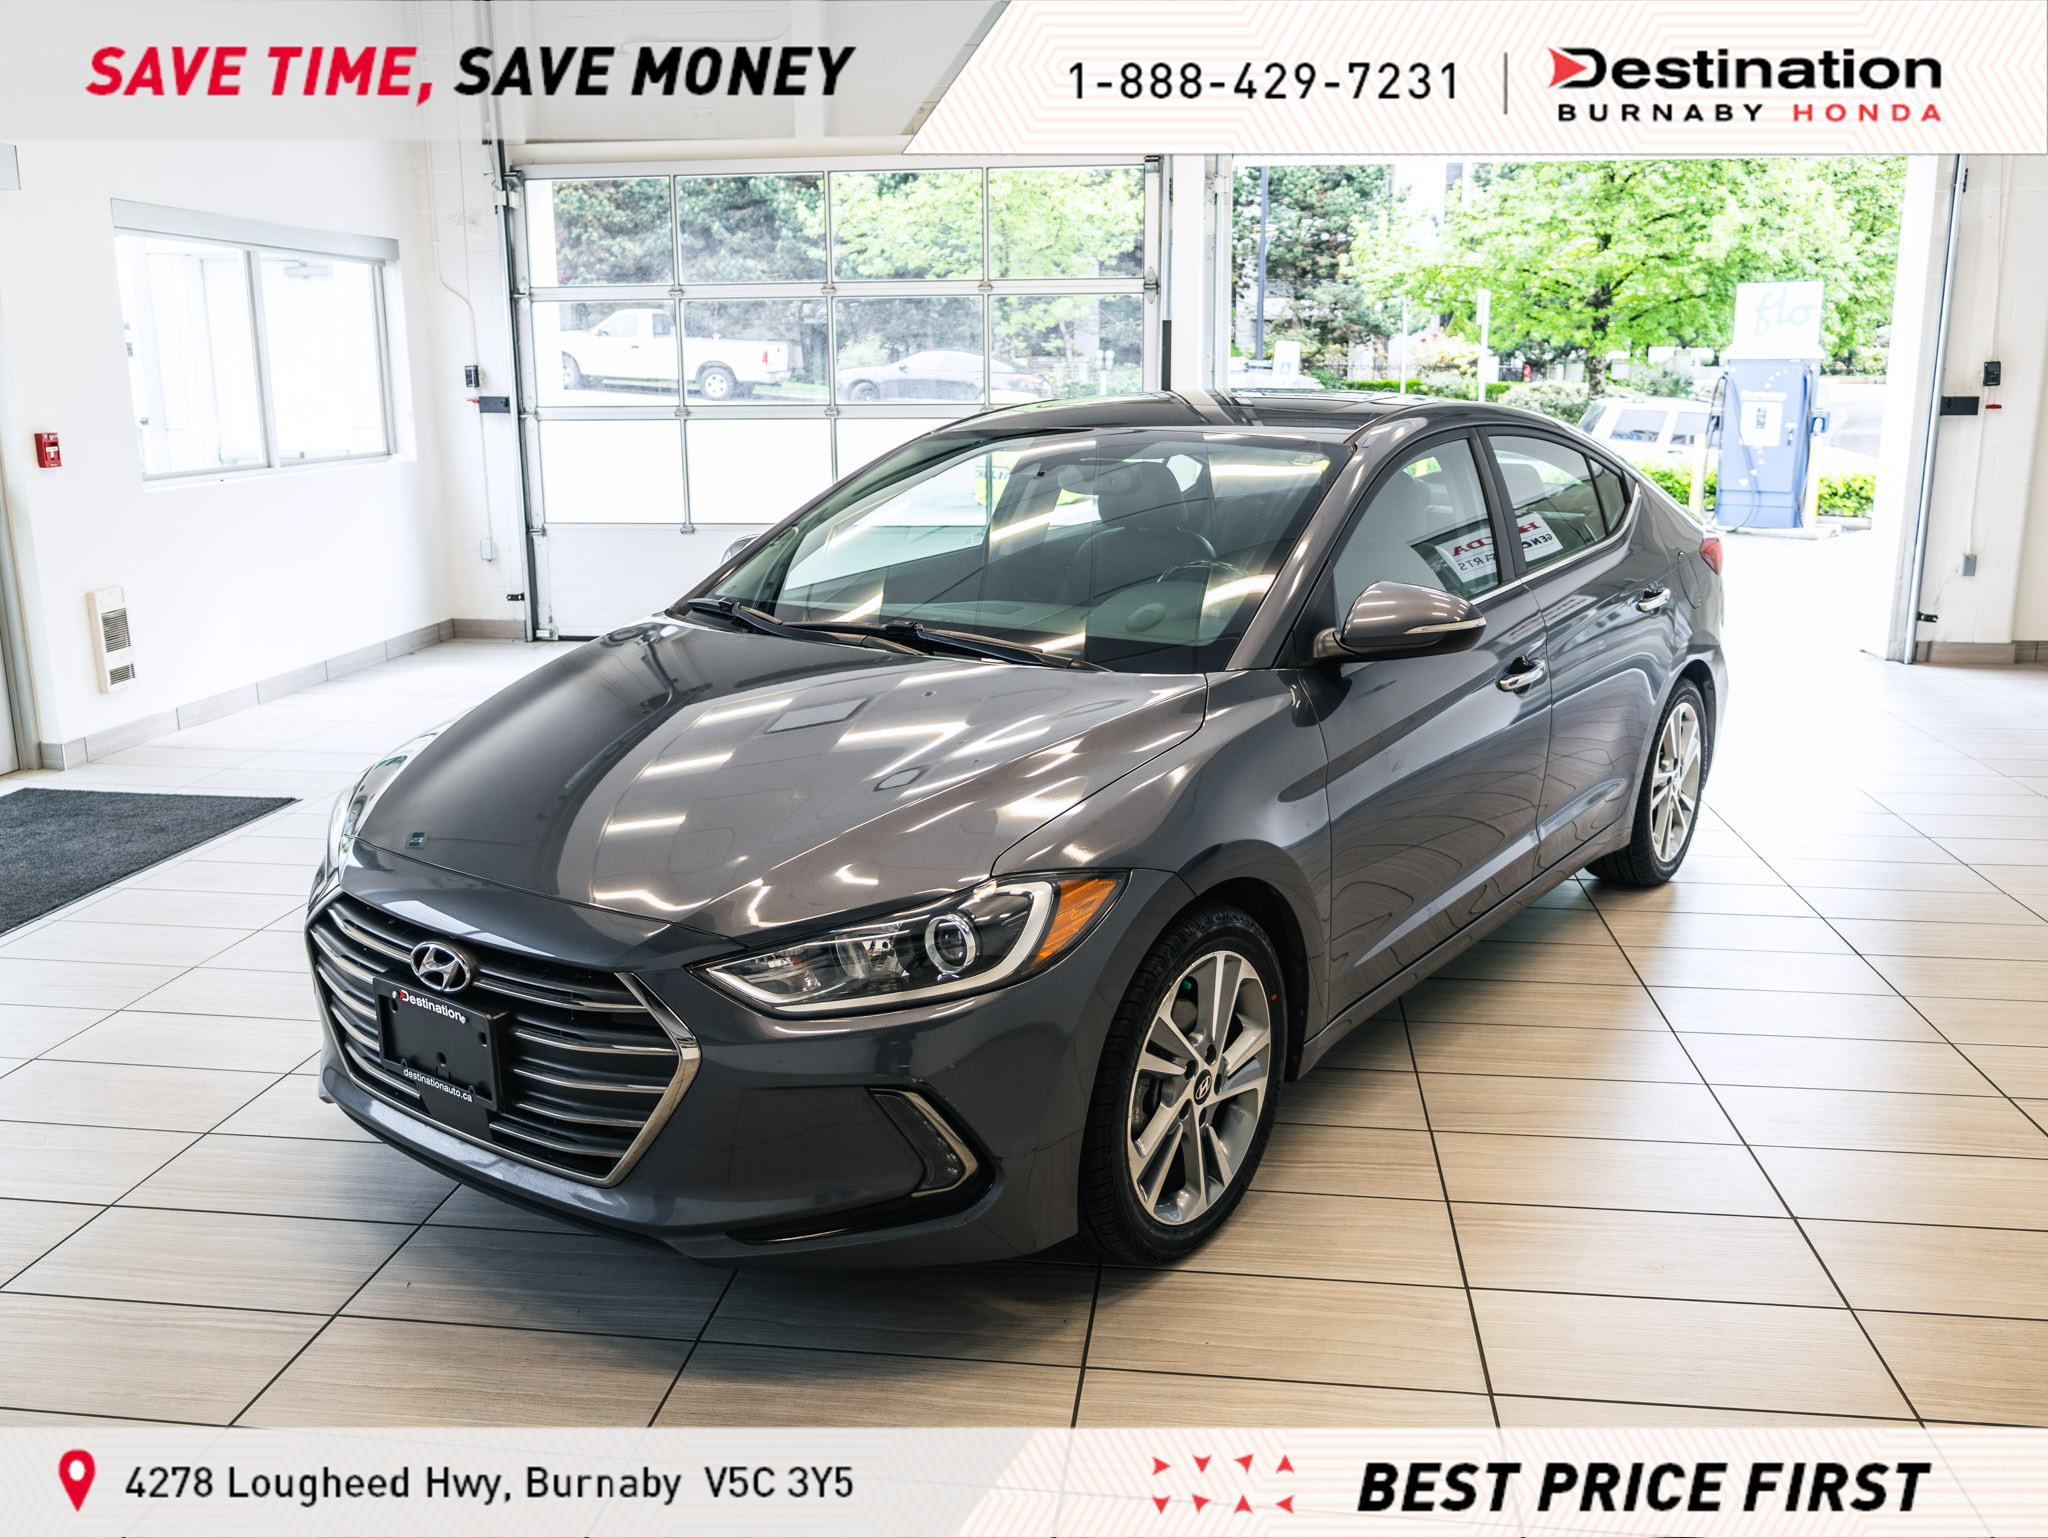 2017 Hyundai Elantra 4dr Sdn Auto Limited - GREAT ON GAS - FULLY LOADED